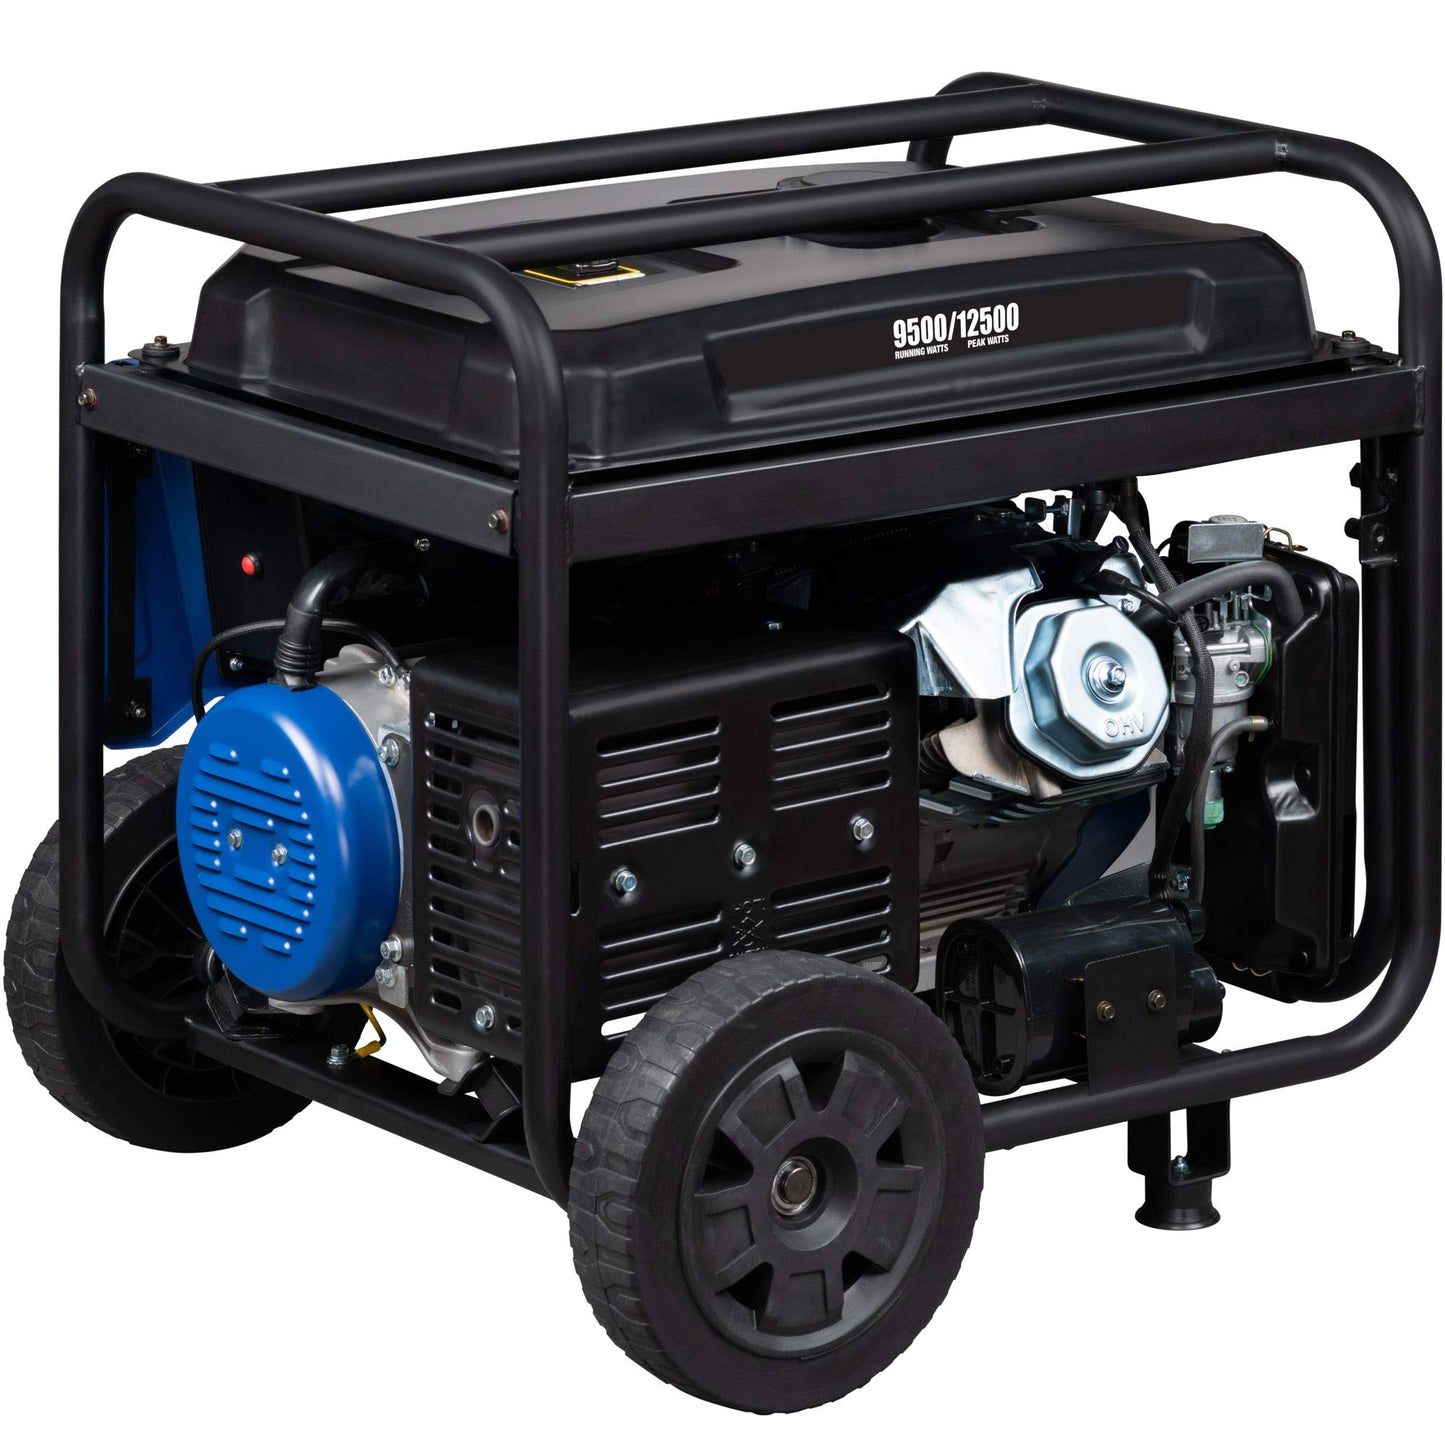 Westinghouse Outdoor Power Equipment 12500 Peak Watt Home Backup Portable Generator with Remote Electric Start